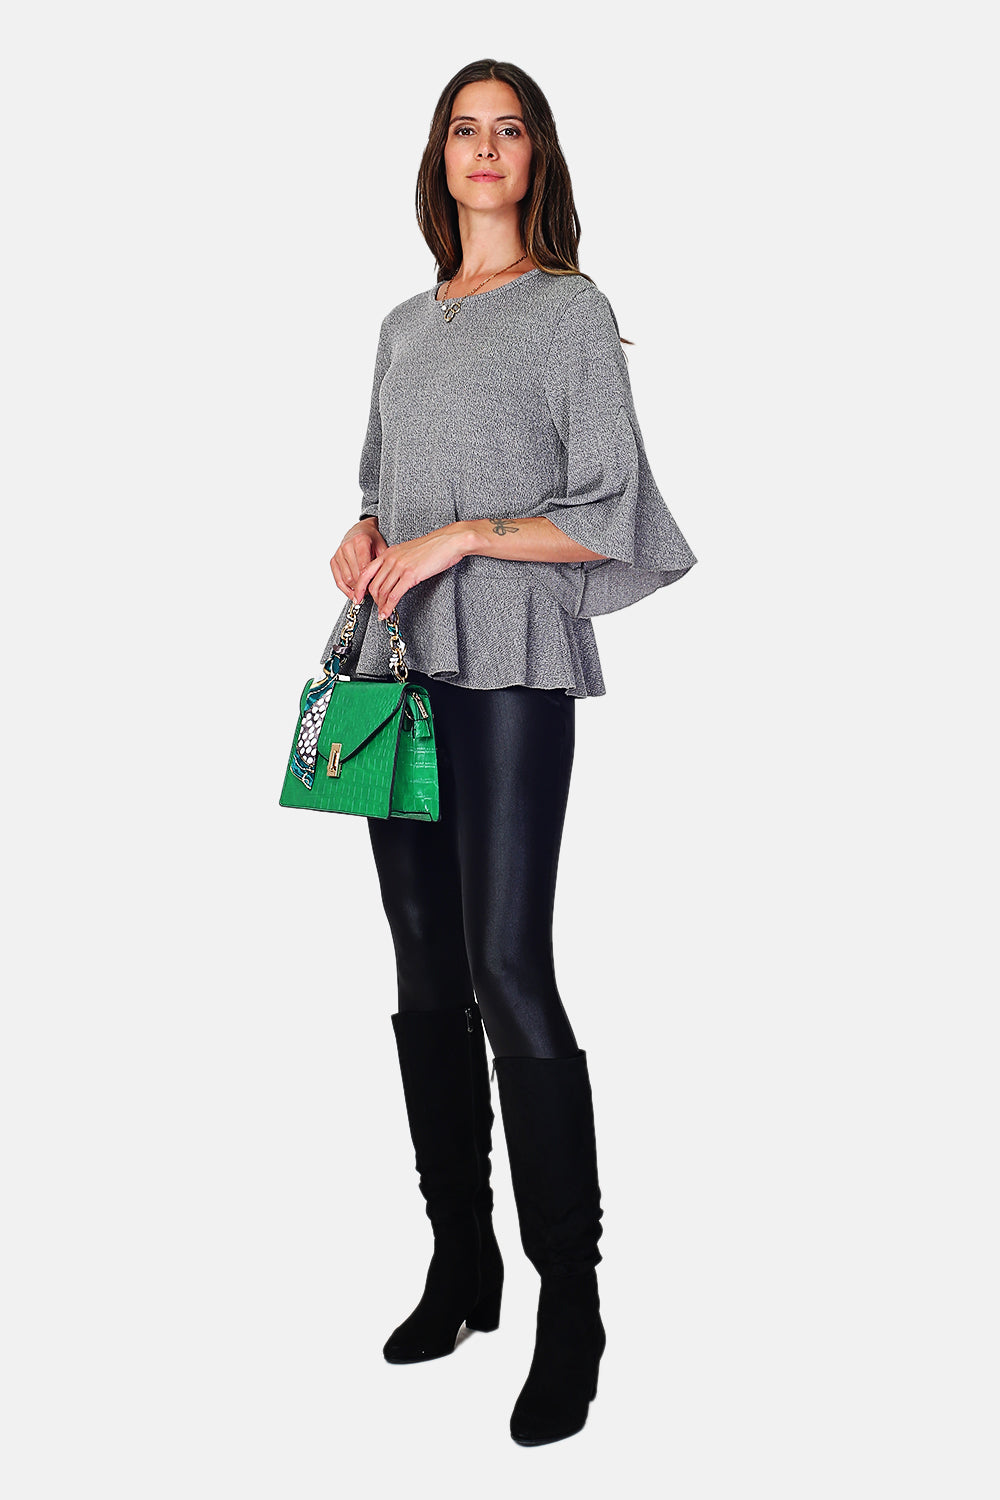 Crew neck top with musketeer sleeves